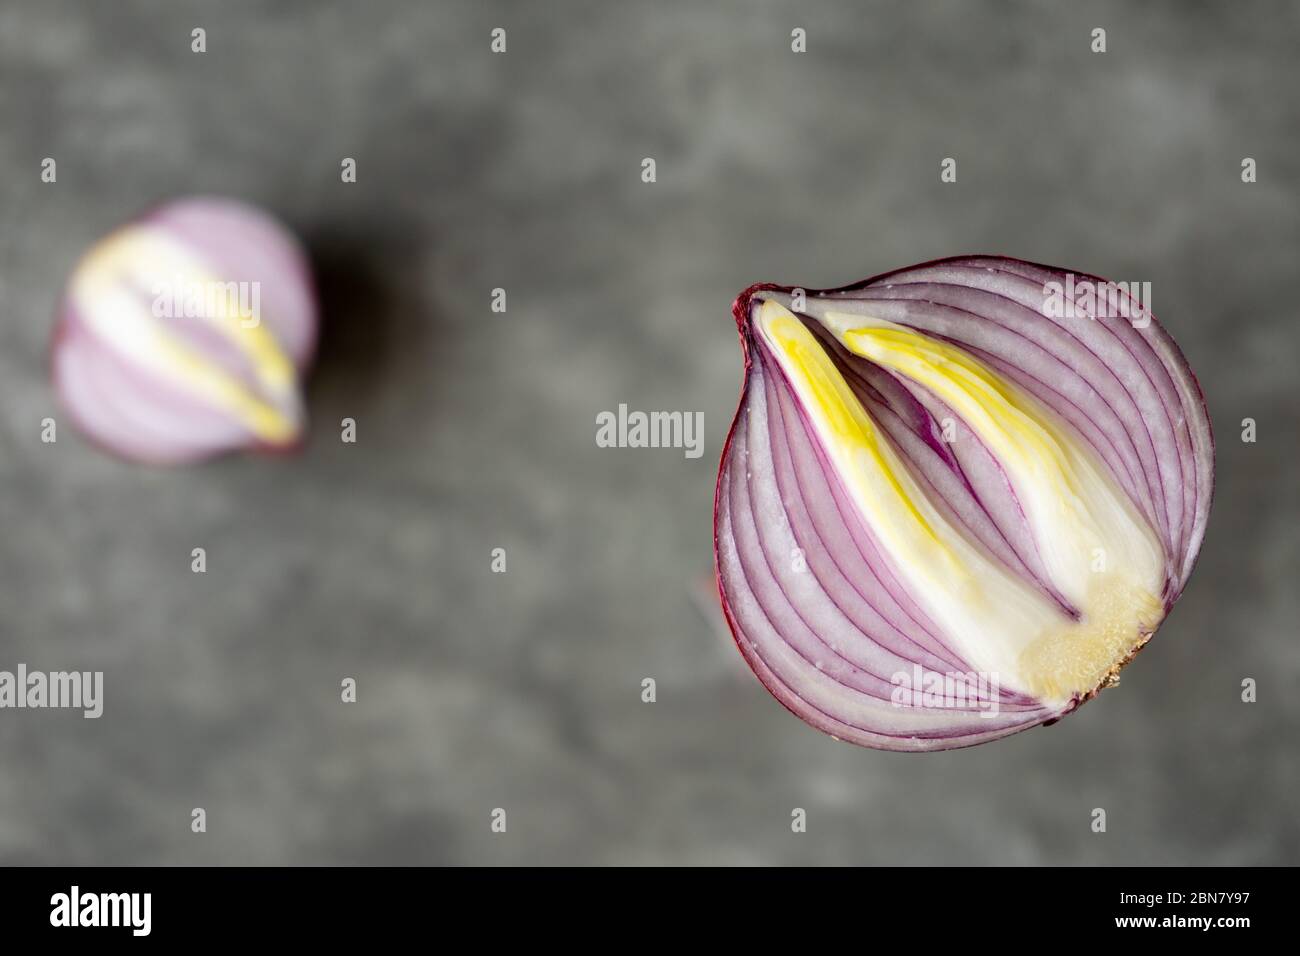 Half of red onion on right side close up. Another half blurred on the left. Macro photo, copy space, creative photo.  Stock Photo